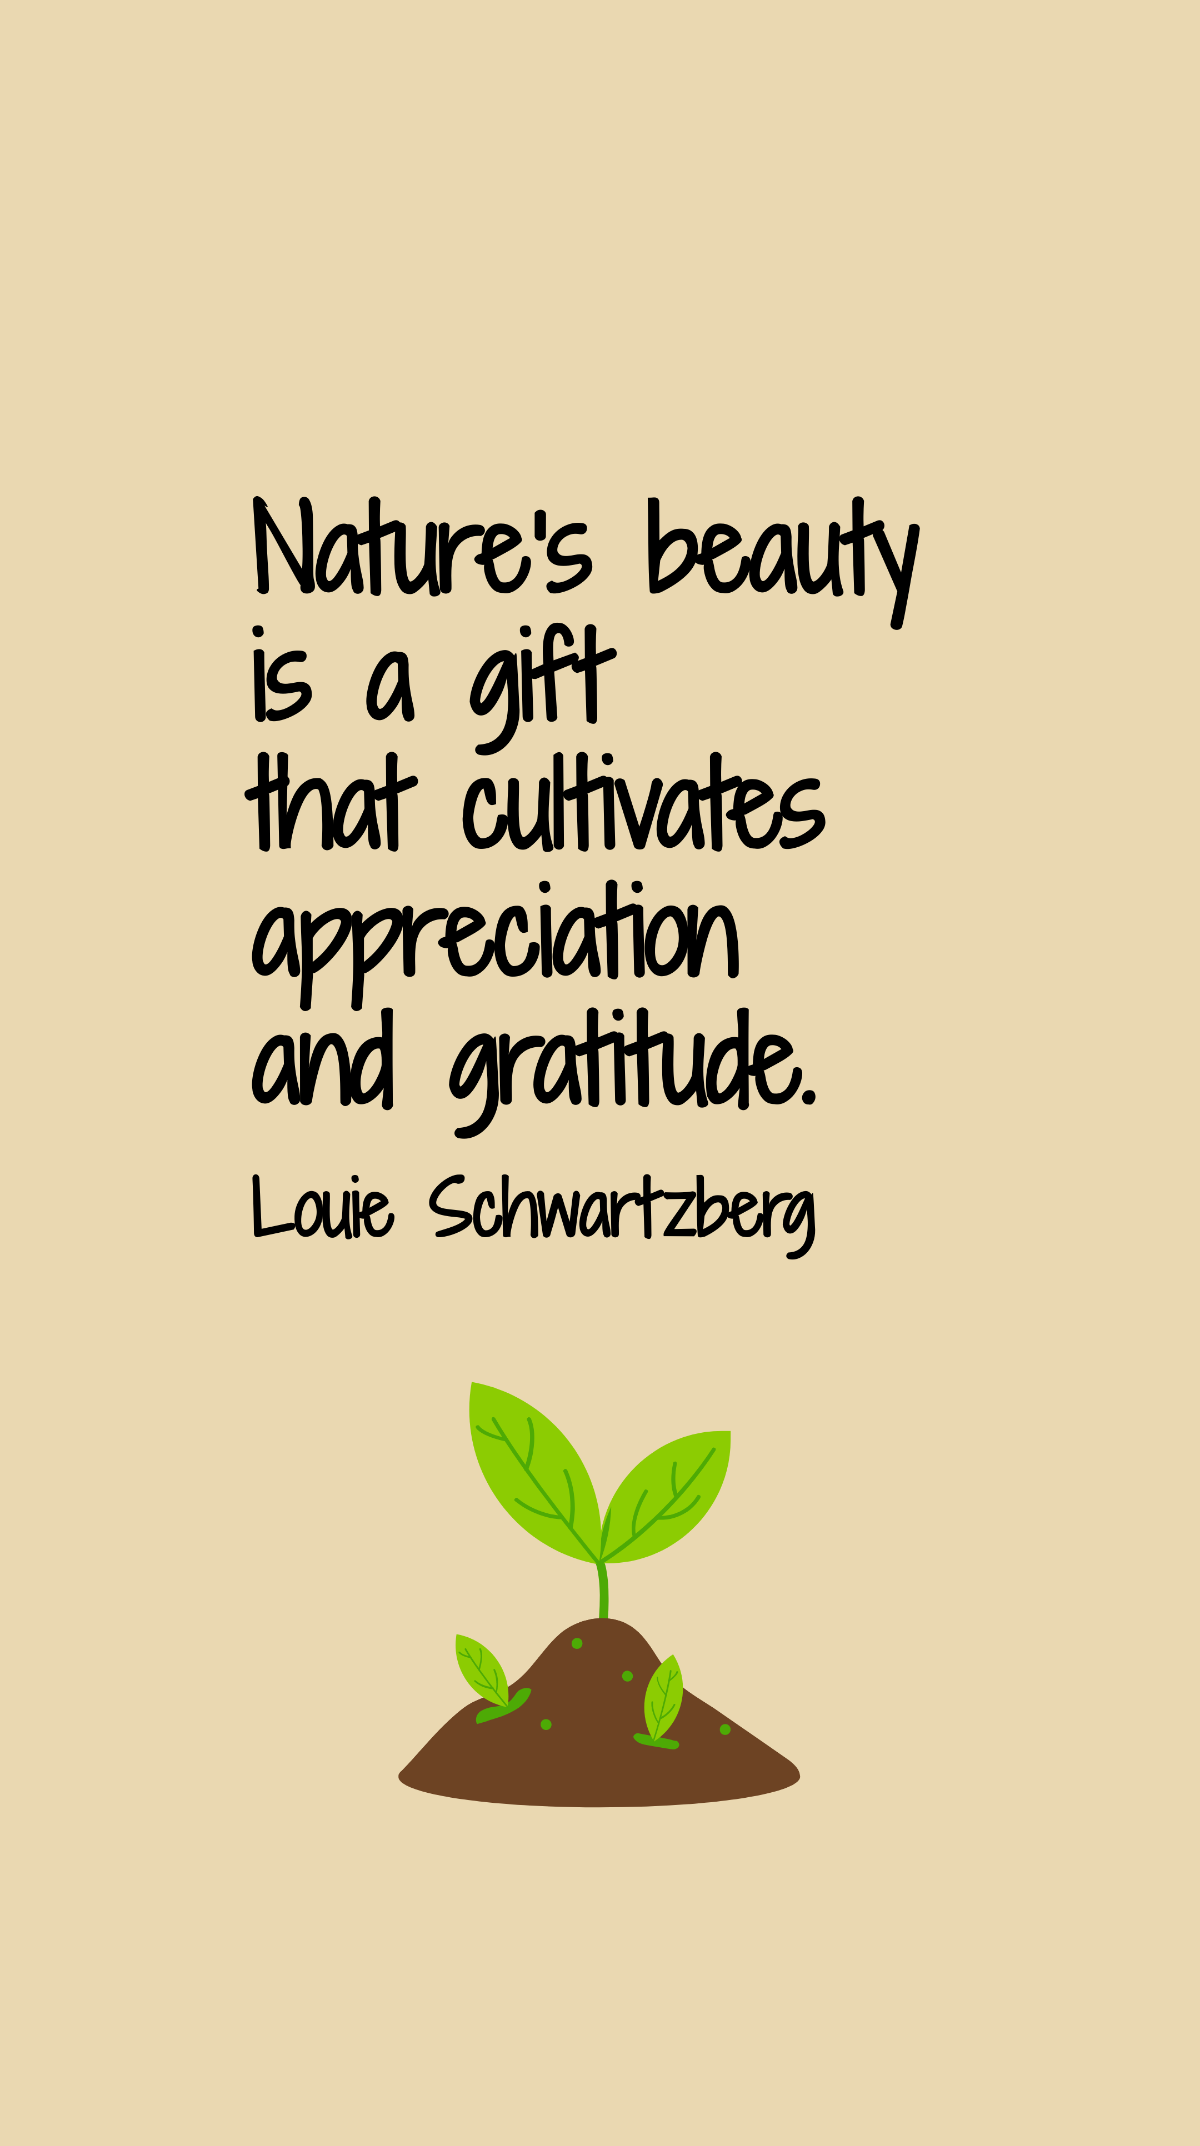 Louie Schwartzberg - Nature's beauty is a gift that cultivates appreciation and gratitude.